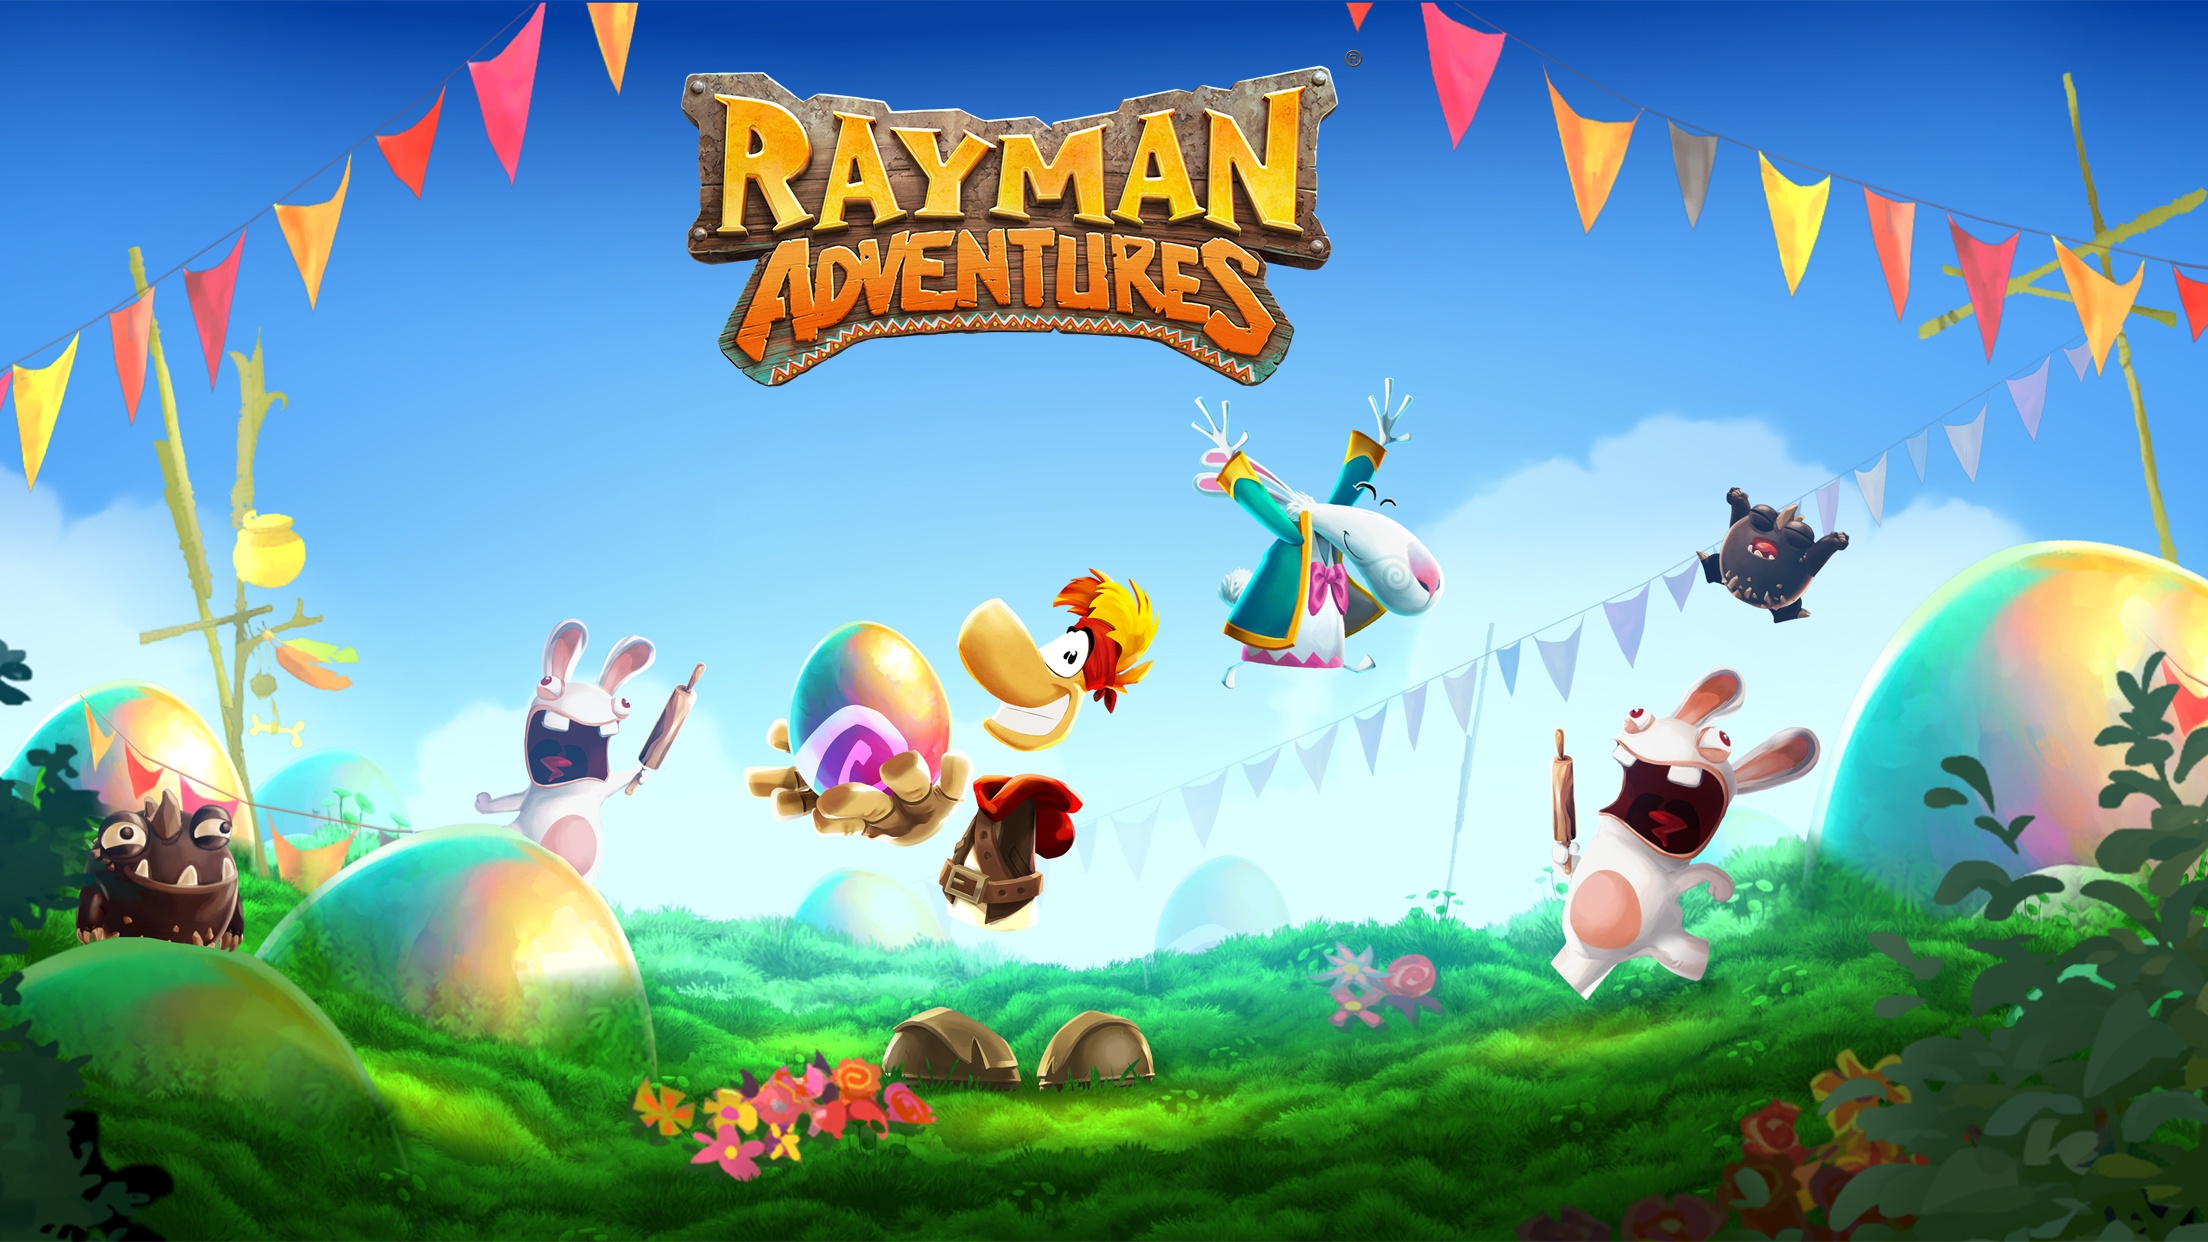 The Rabbids Are Here in Rayman Adventures New Easter Update